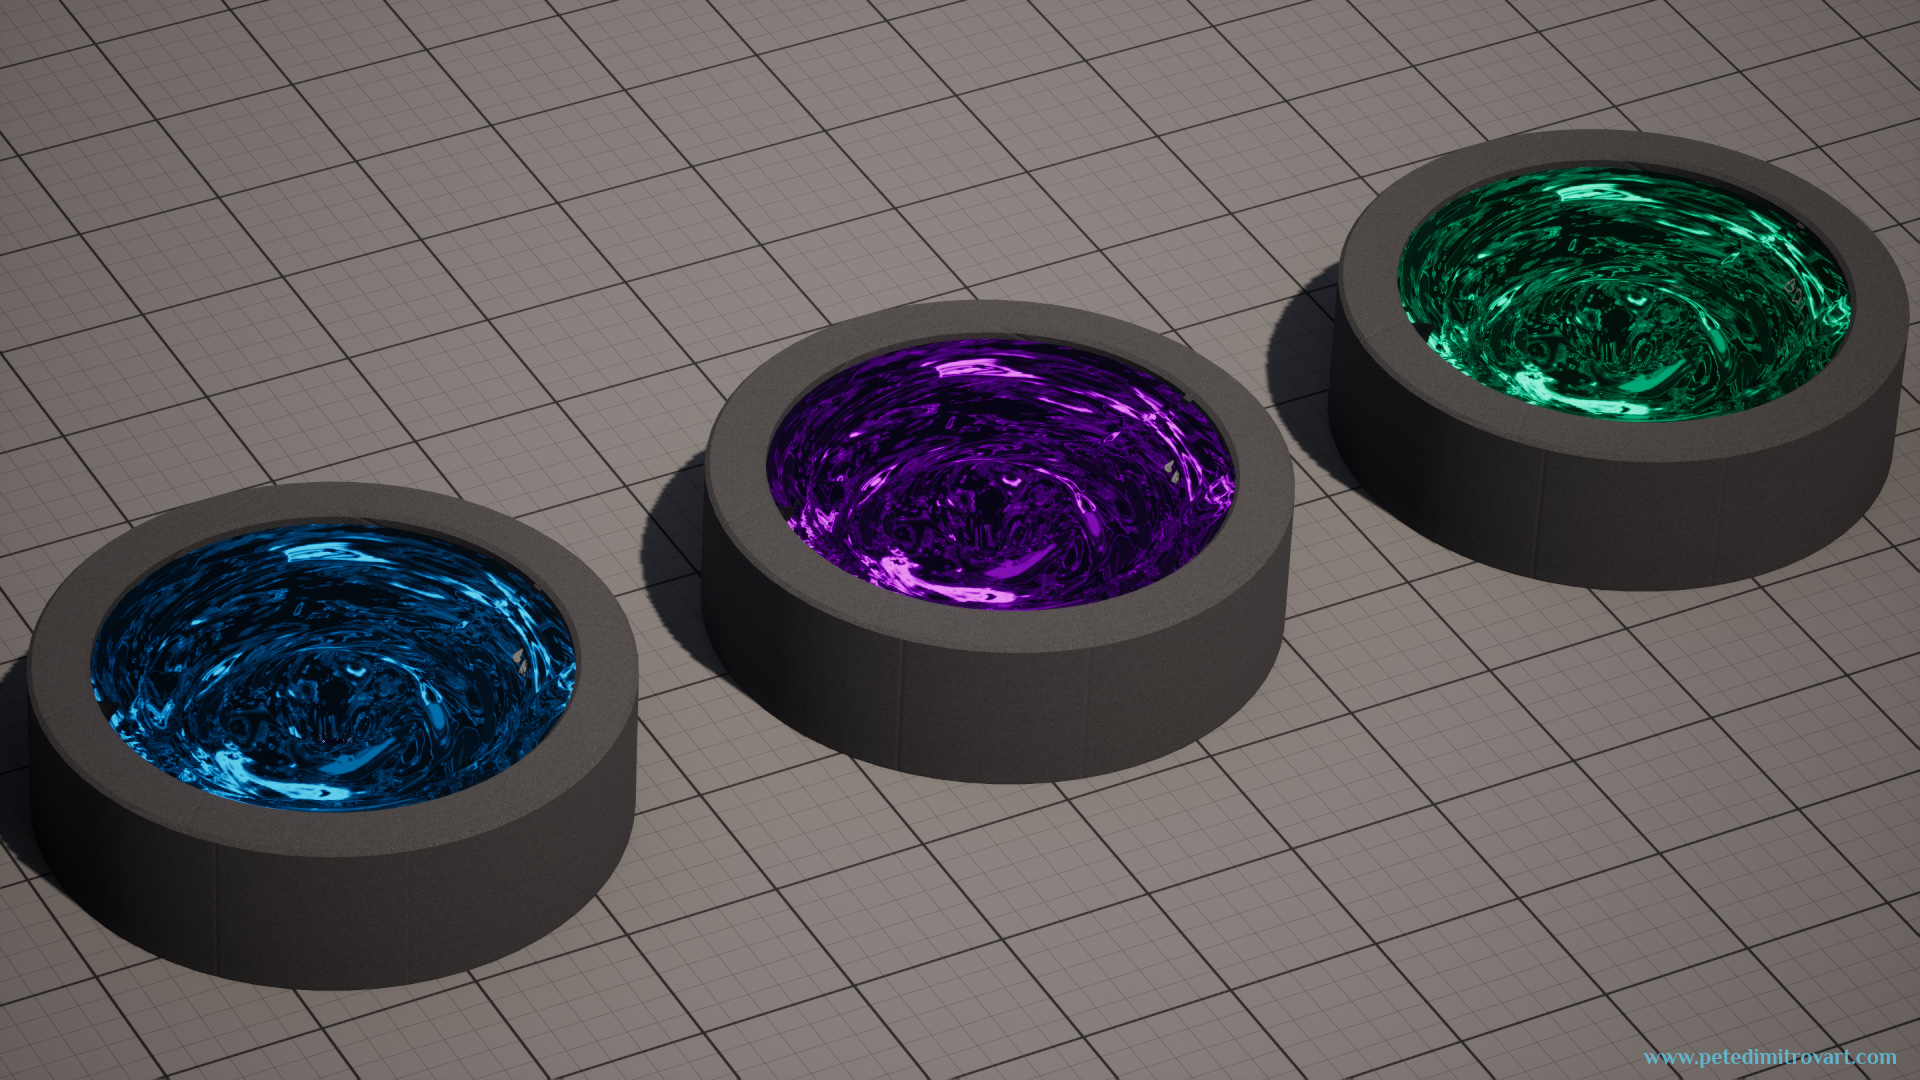 Another angle showcasing the vortex basin VFX. This time its 3 of them. A blue, purple and then a green one. They are seen in a placeholder scene with grid materials. The camera is from very, very far away and unrealistically small Field of View (or otherwise large Focal Length), reducing the perspective and showcasing the props as if from an orthographic view.